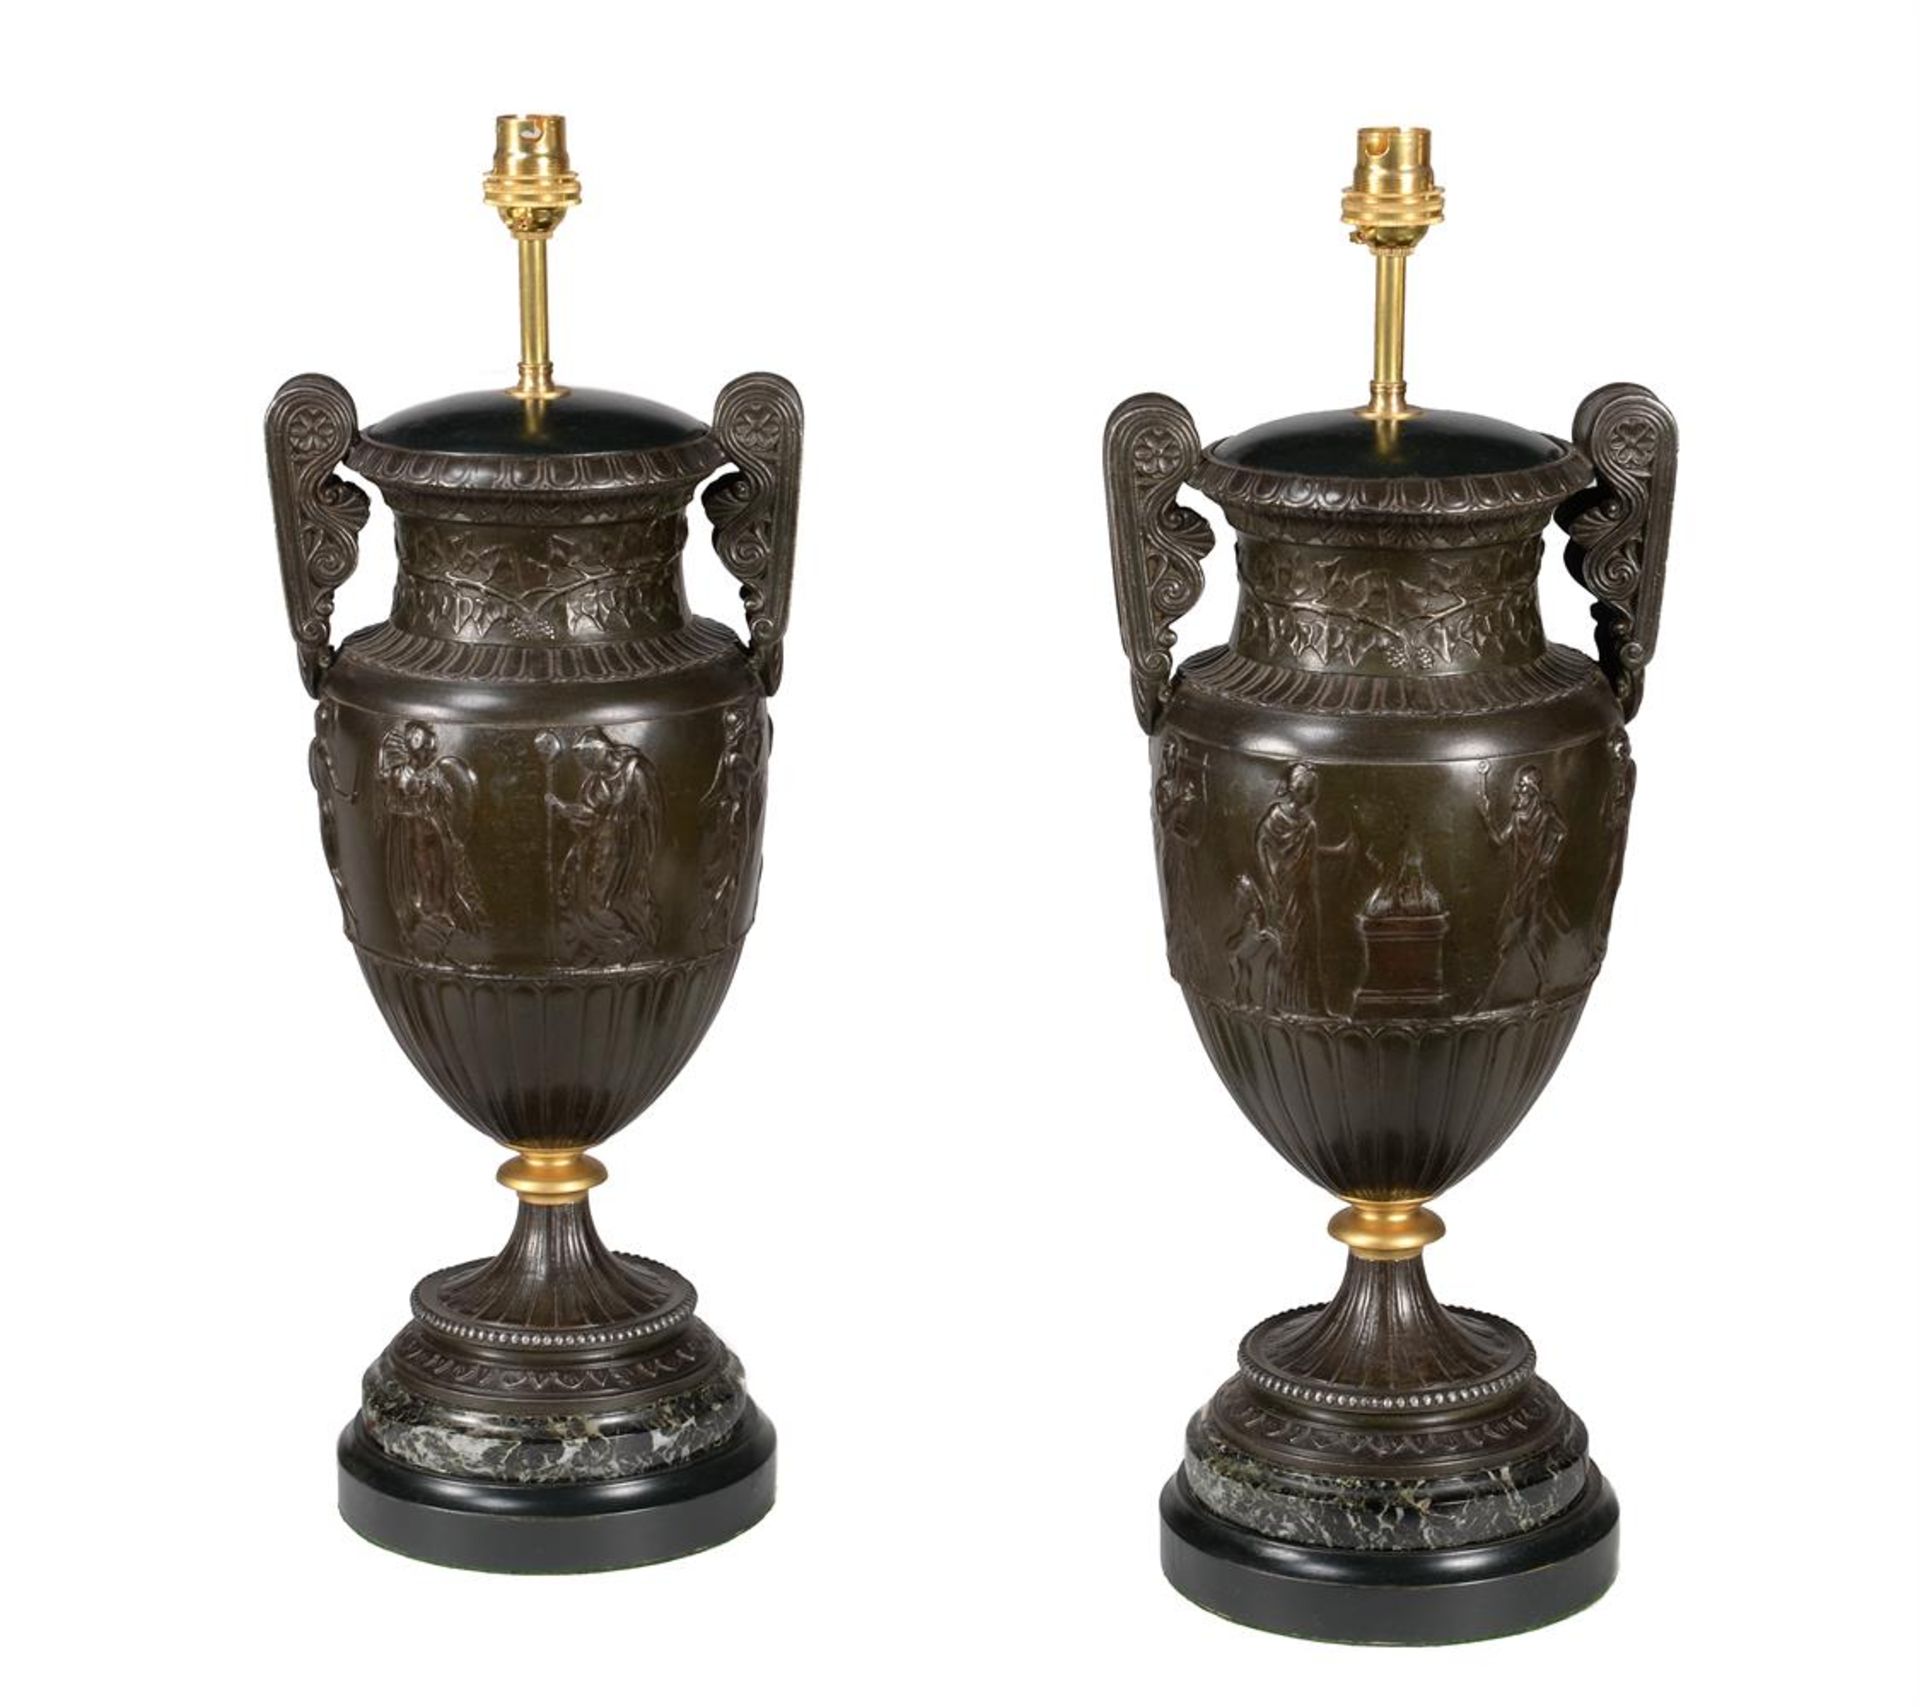 A pair of French bronze patinated spelter urns